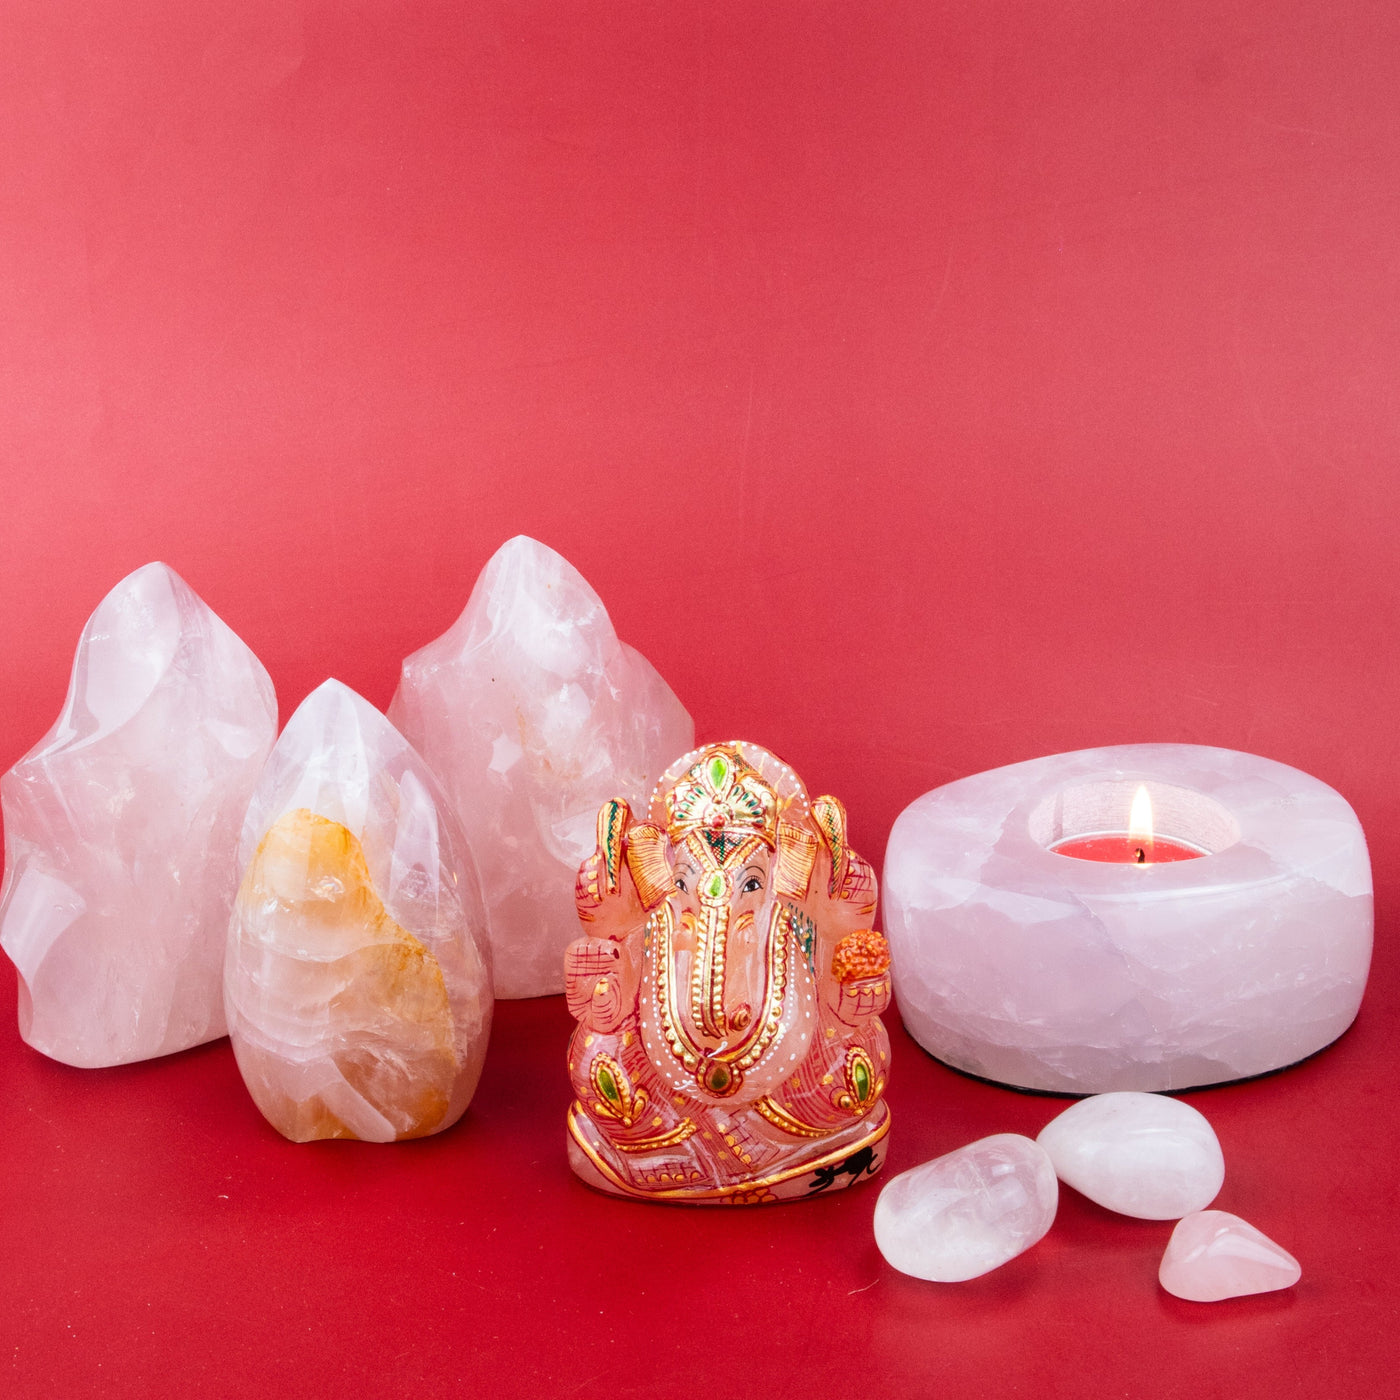 Love Remedies by Energy Muse, featuring a Rose Quartz Flame crystal, a Rose Quartz tealight candle holder, and a painted Rose Quartz Ganesha carved figurine.